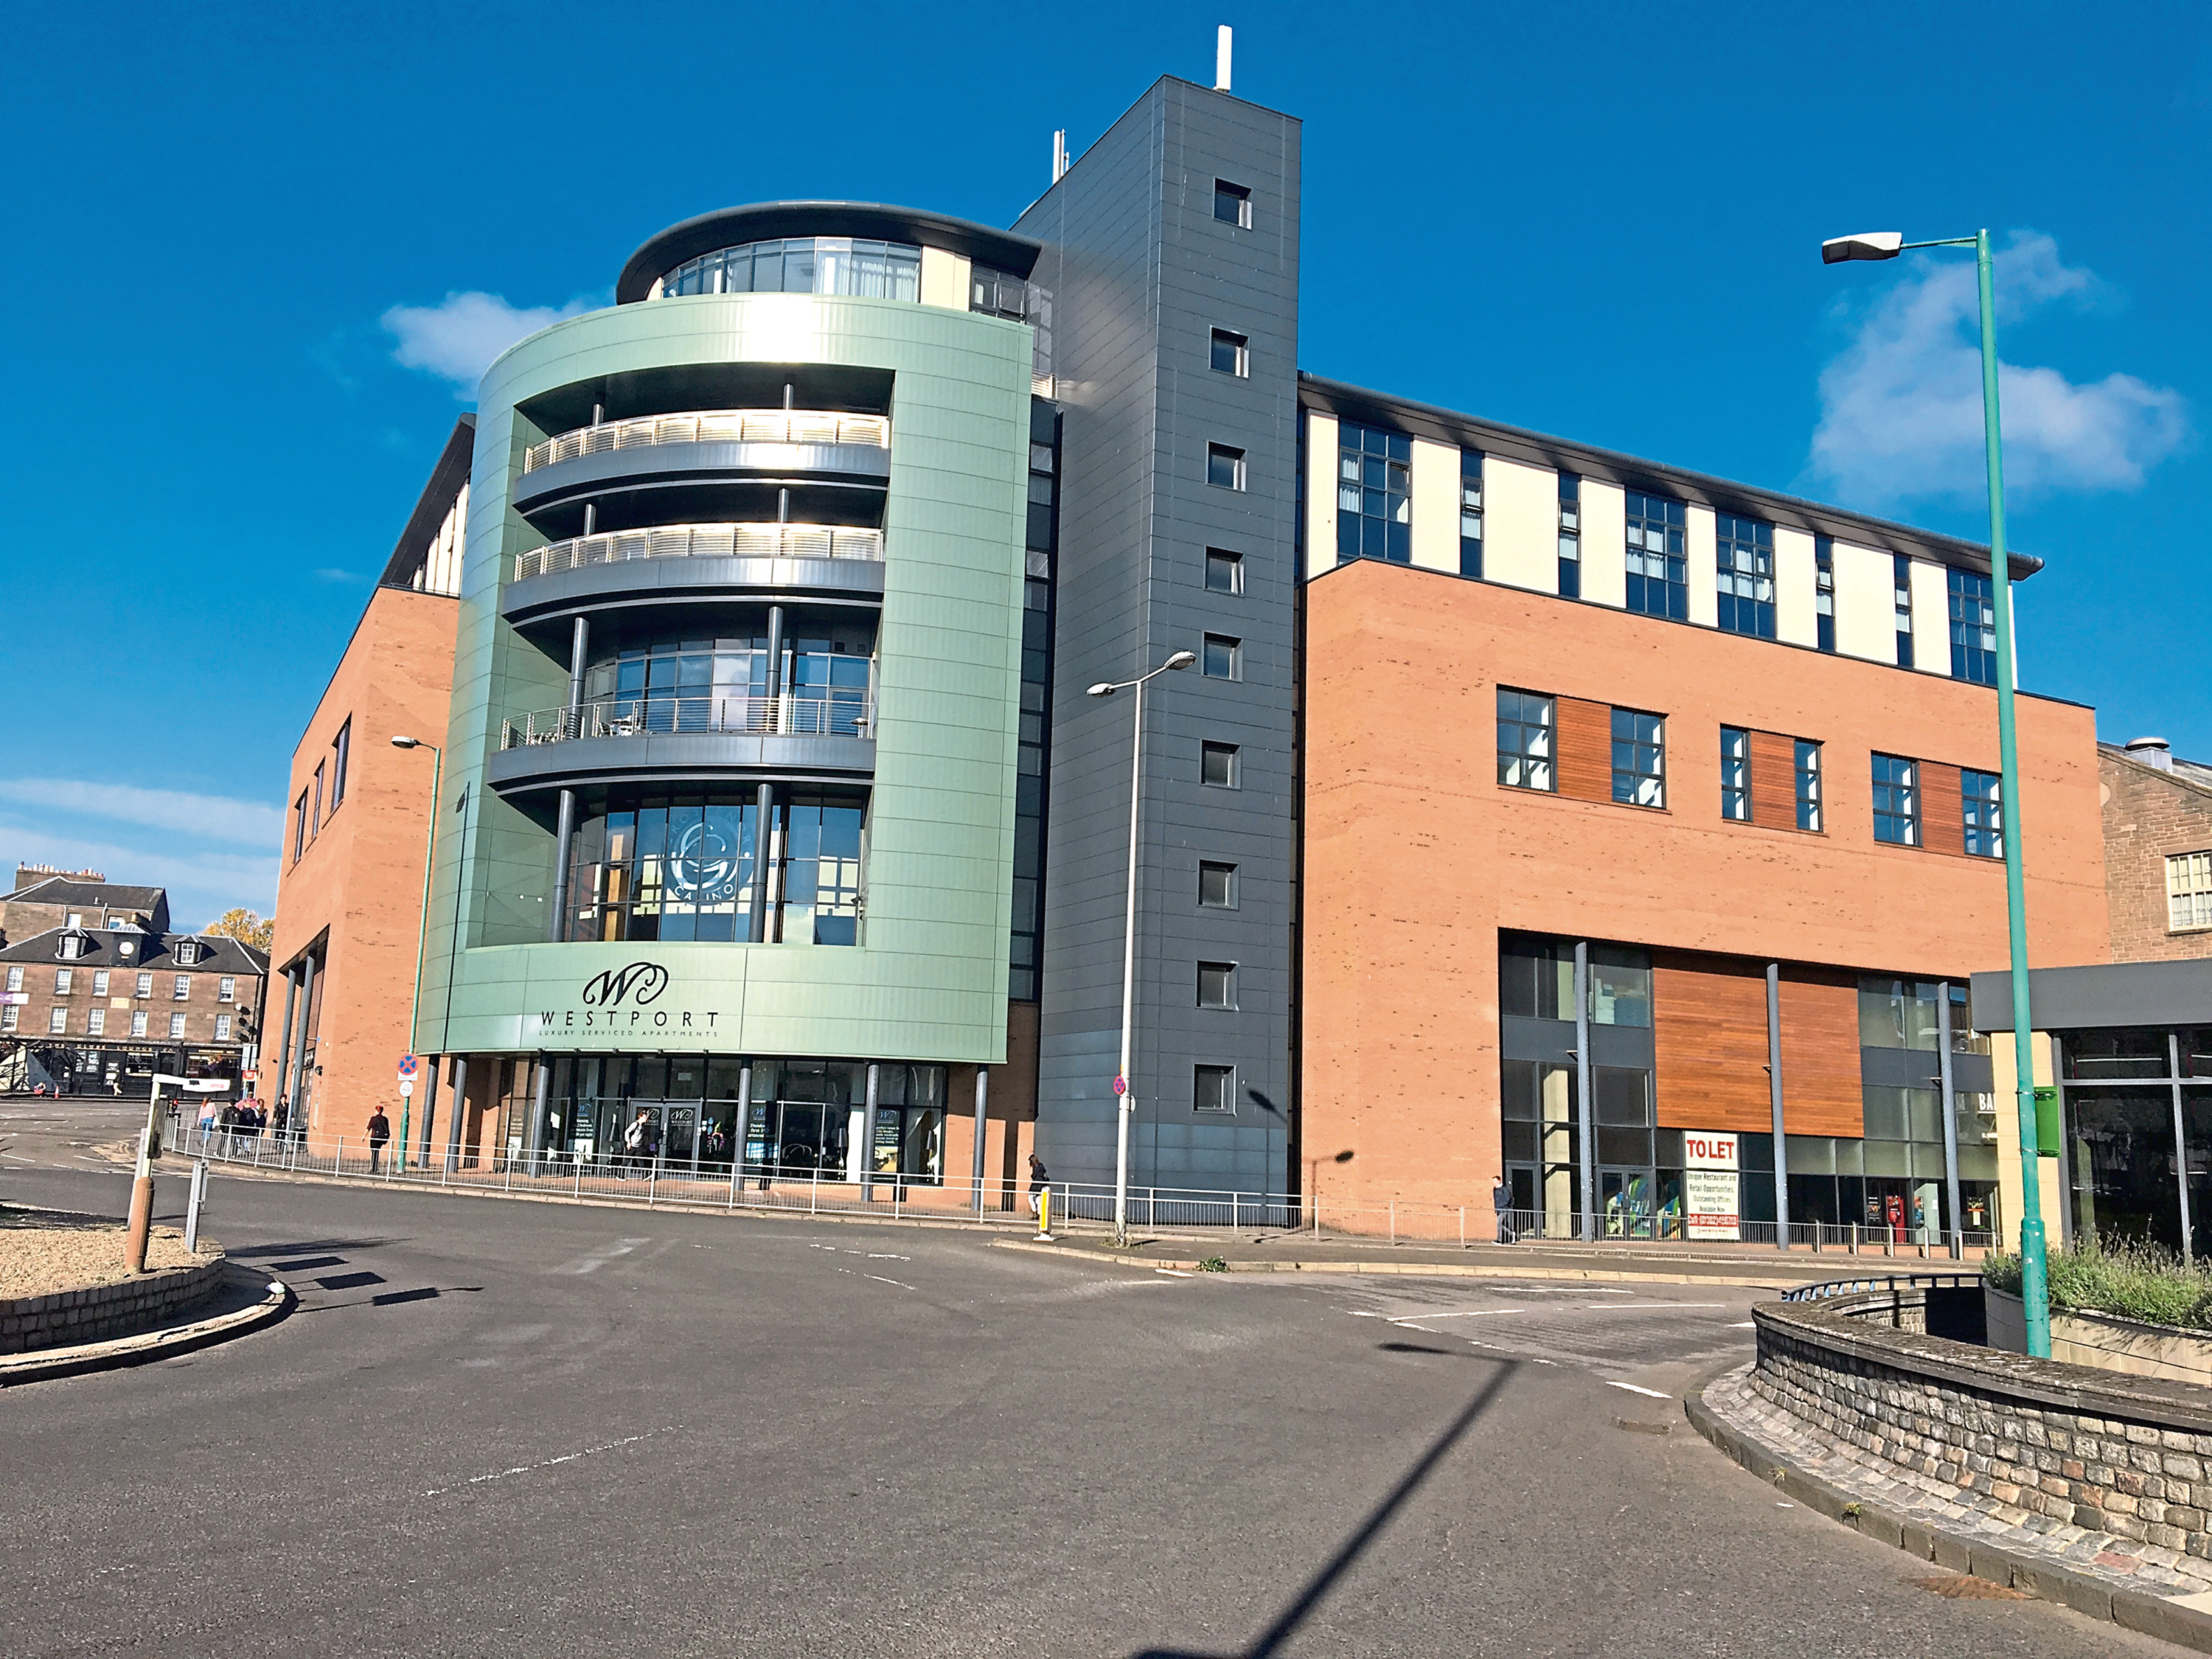 The sale includes the mixed use development at West Marketgait in Dundee.